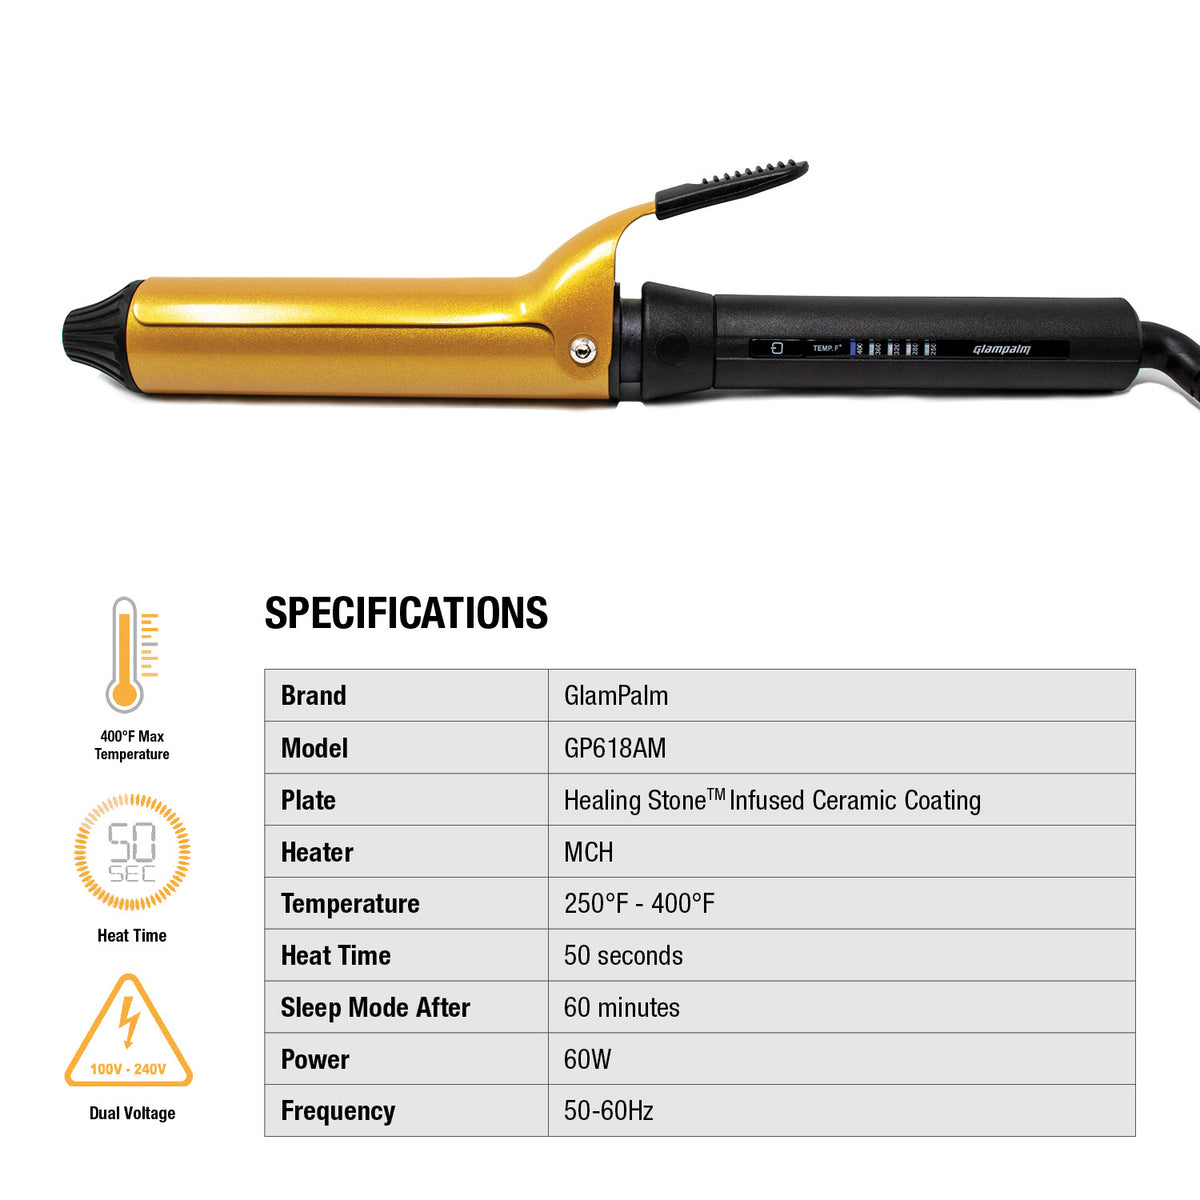 Glampalm 1.2-inch clip iron product specifications